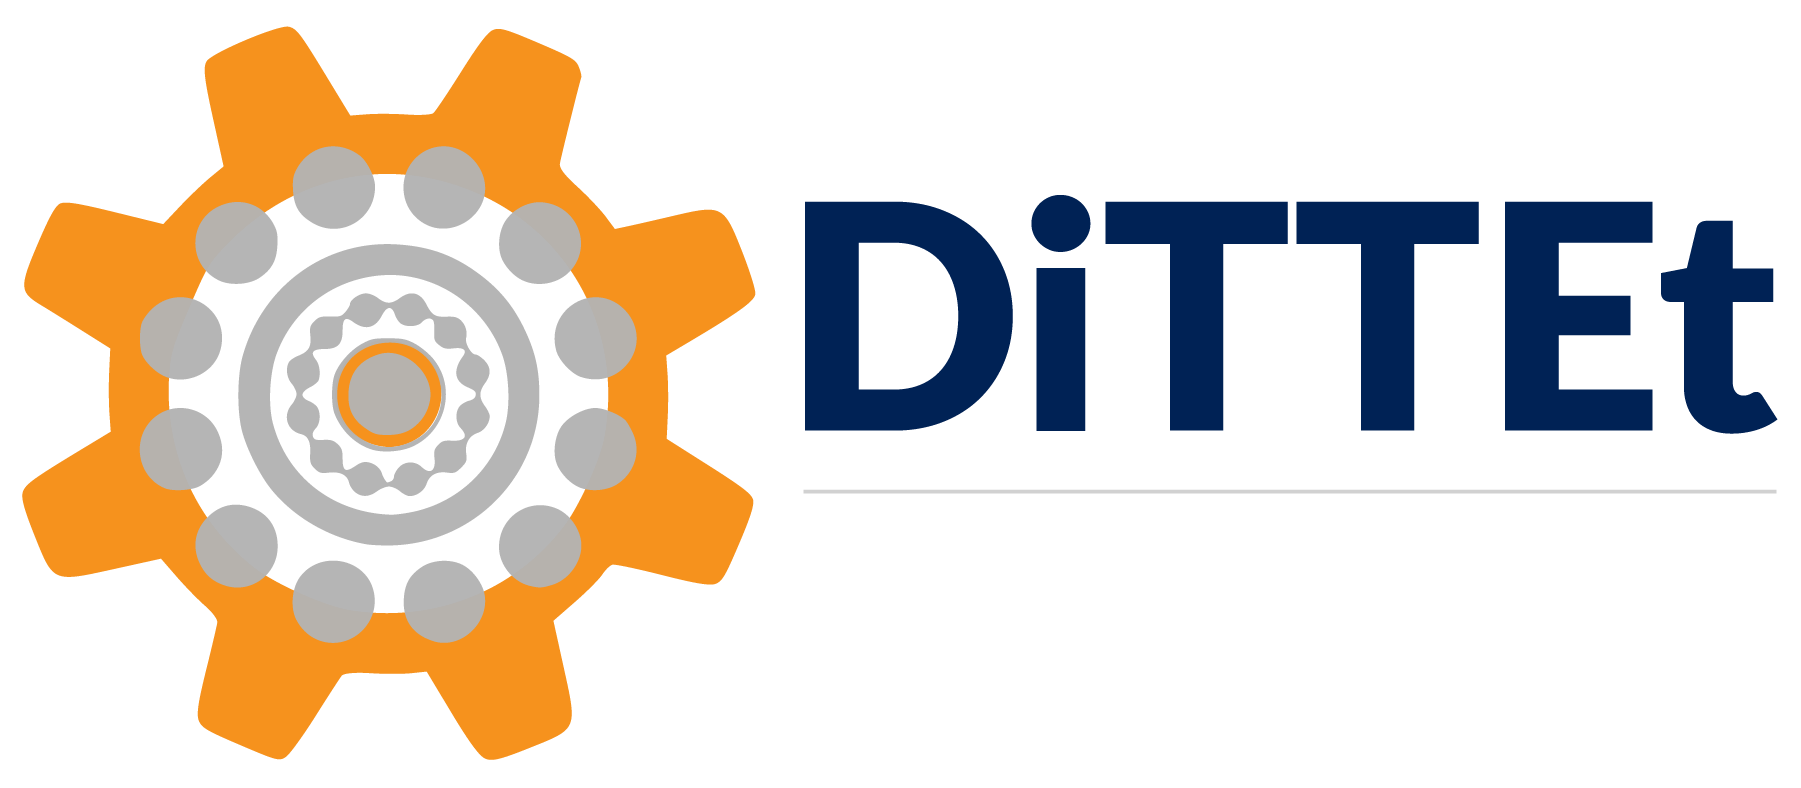 3rd International Conference on Disruptive Technologies, Tech Ethics and Artificial Intelligent (DiTTEt)